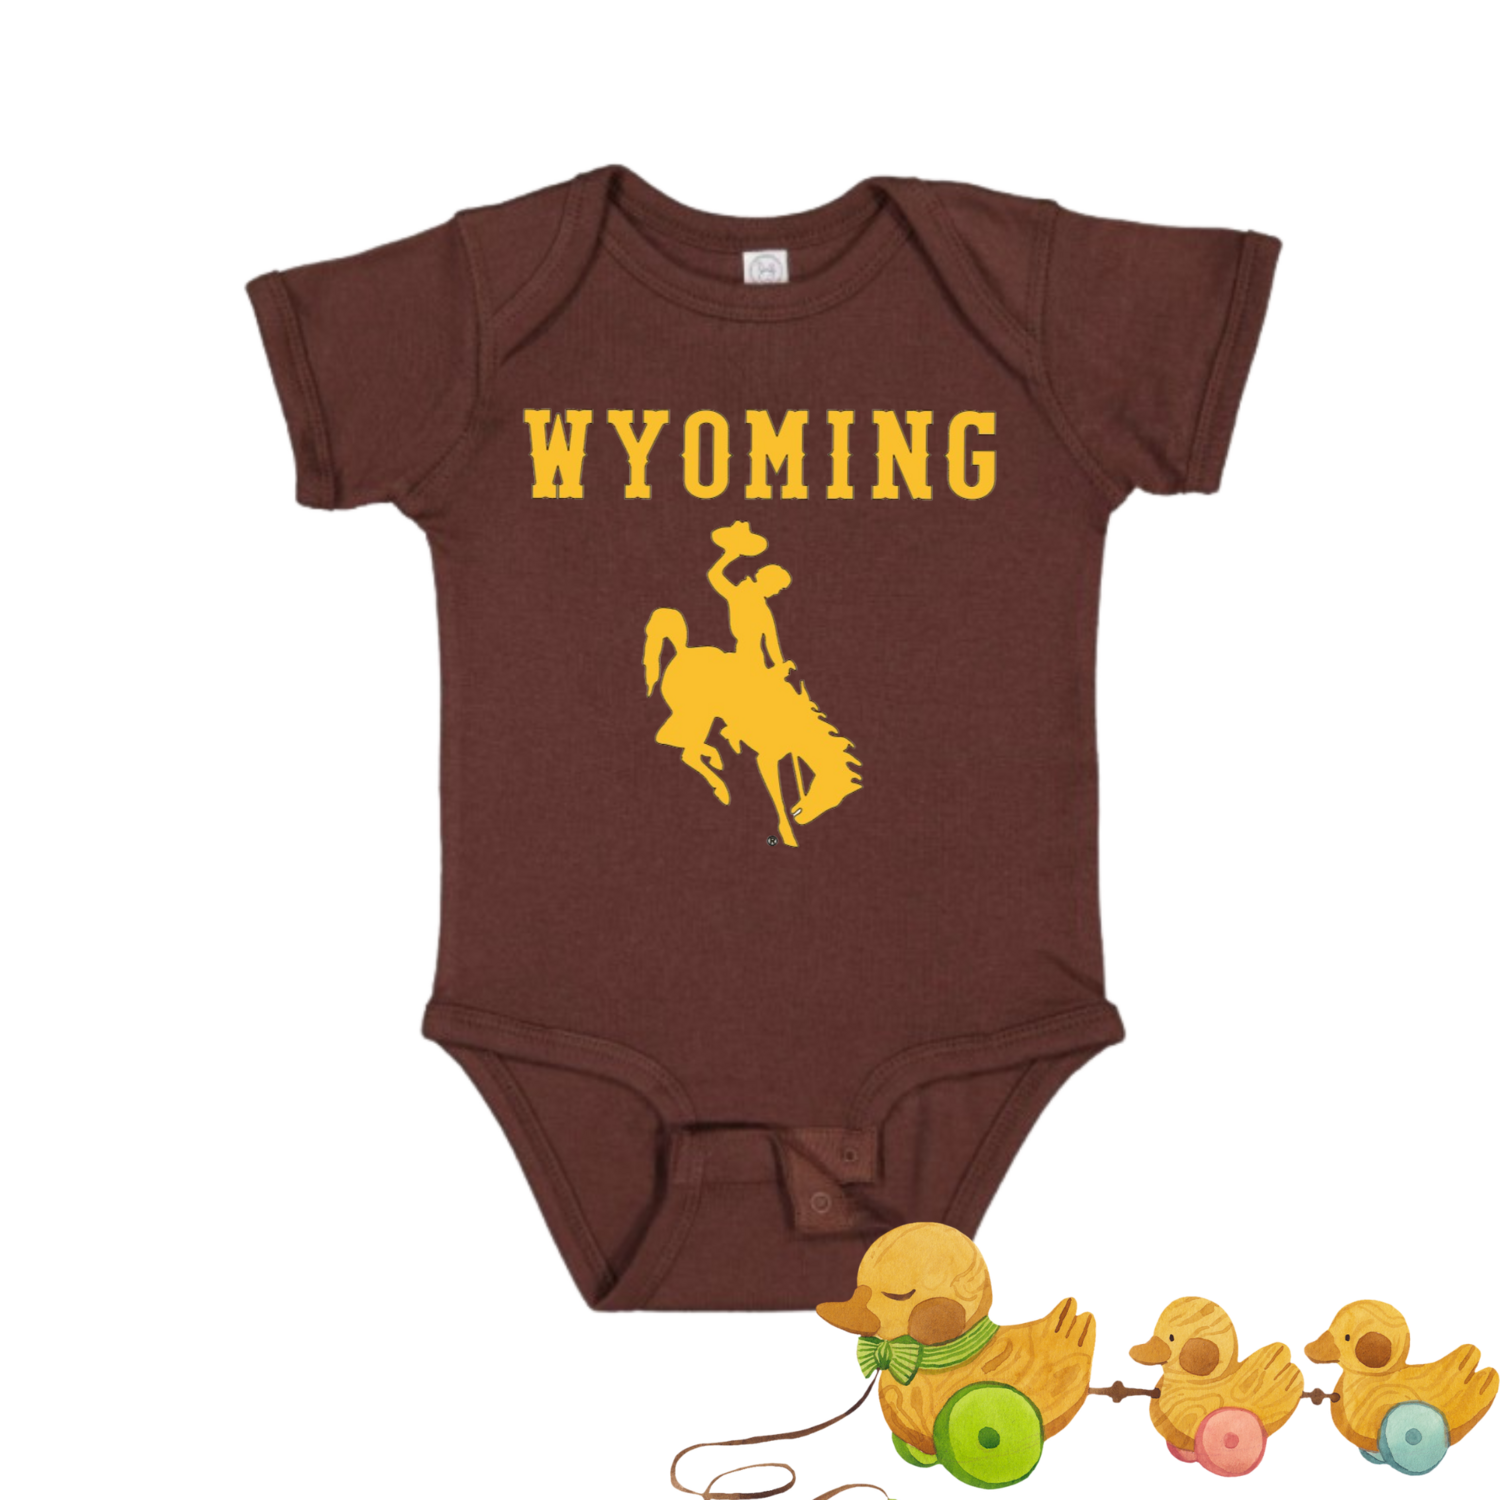 University of Wyoming Brown and Gold Onesies for Babies